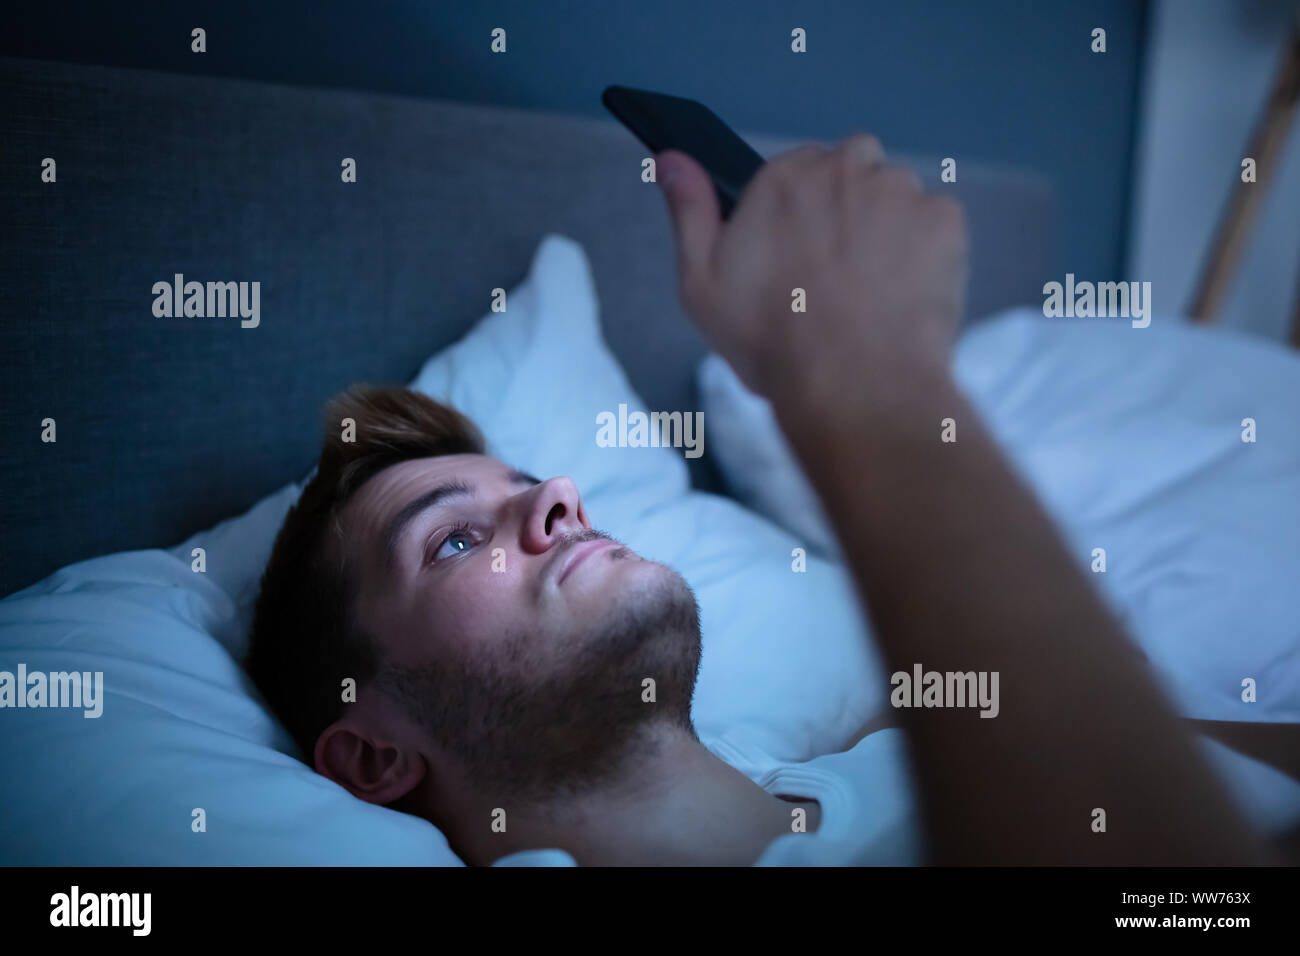 Man In Bed With Mobile Phone At Night Stock Photo